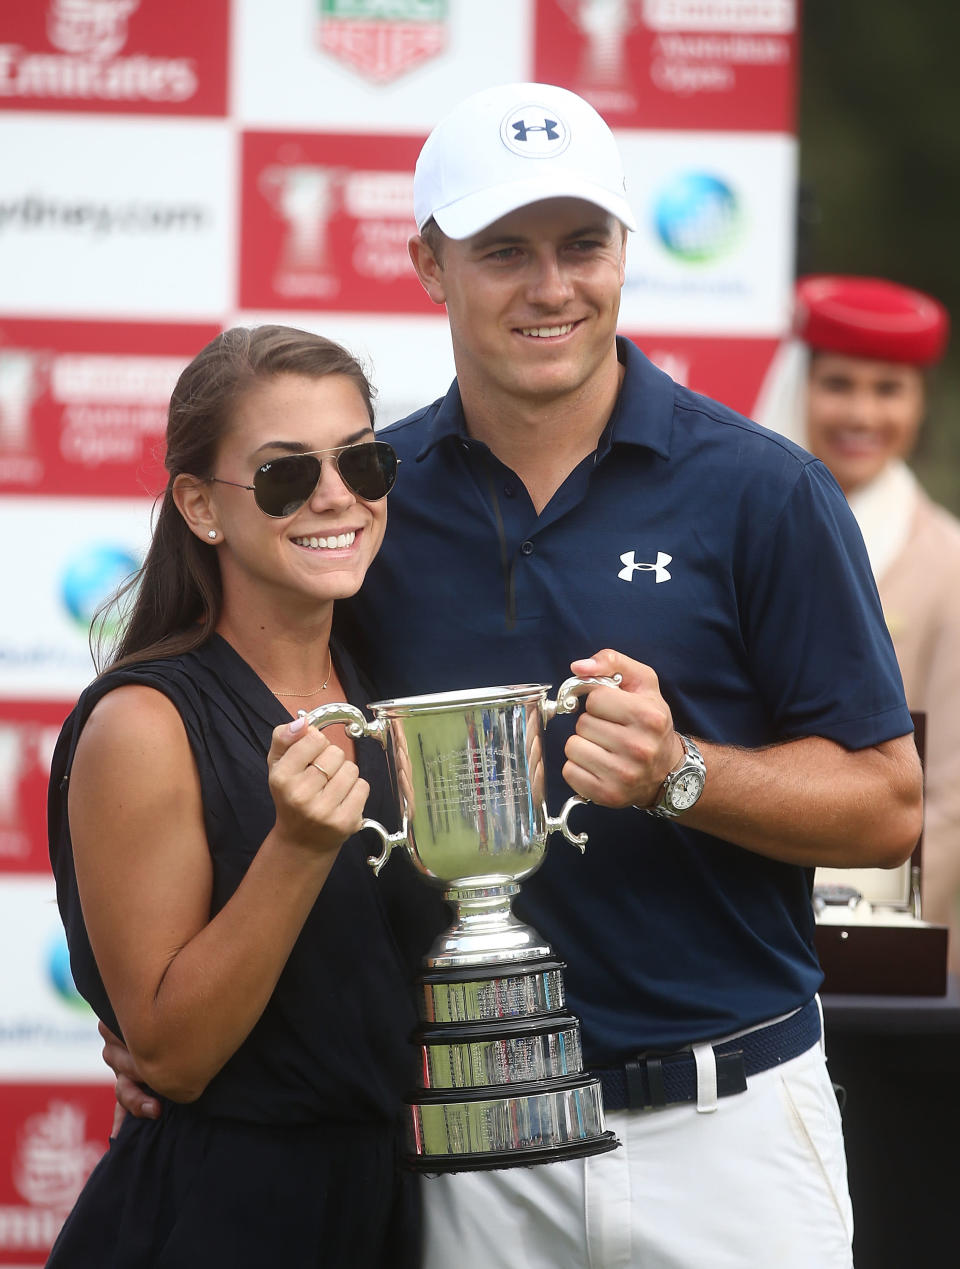 SYDNEY, AUSTRALIA - NOVEMBER 20: Jordan Spieth of the United States and girlfriend Annie Verret pose with the Stonehaven trophy after winning the 2016 Australian Open during day four of the 2016 Australian golf Open at Royal Sydney Golf Club on November 20, 2016 in Sydney, Australia. (Photo by Mark Metcalfe/Getty Images)